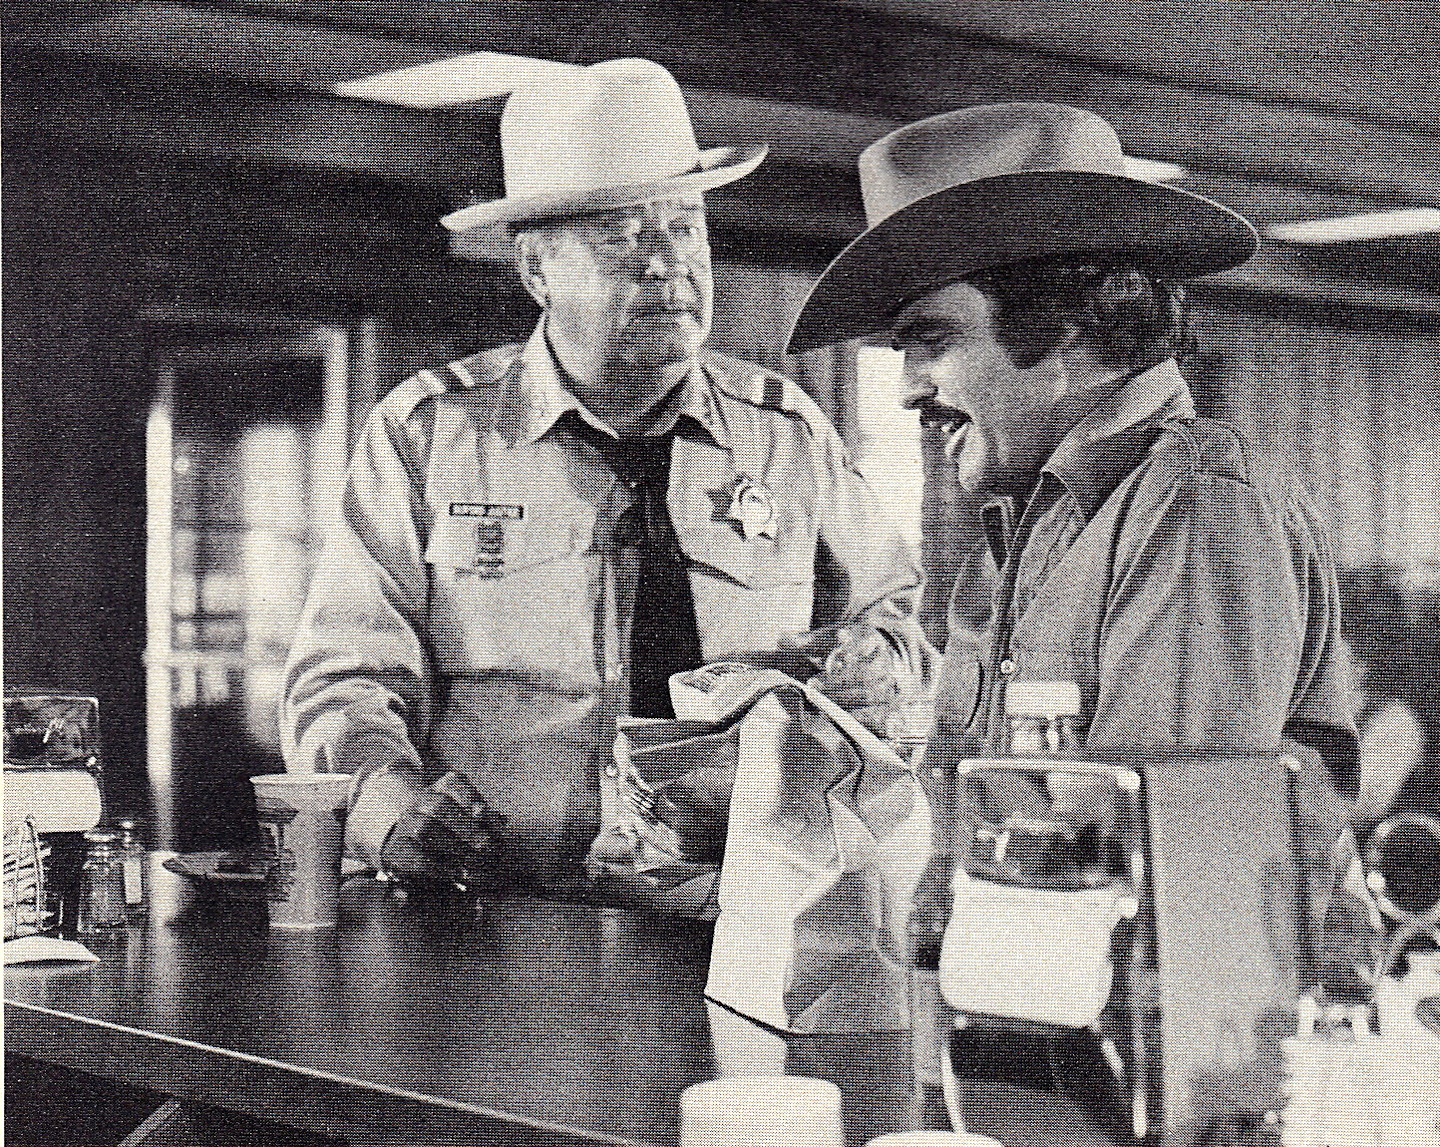 Jerry Reed’s hit song “Eastbound and Down,” from “Smokey and the Bandit,” was all about Burt Reynolds, right, playing Bandit and outfoxing Sheriff Buford T. Justice, played by Jackie Gleason.